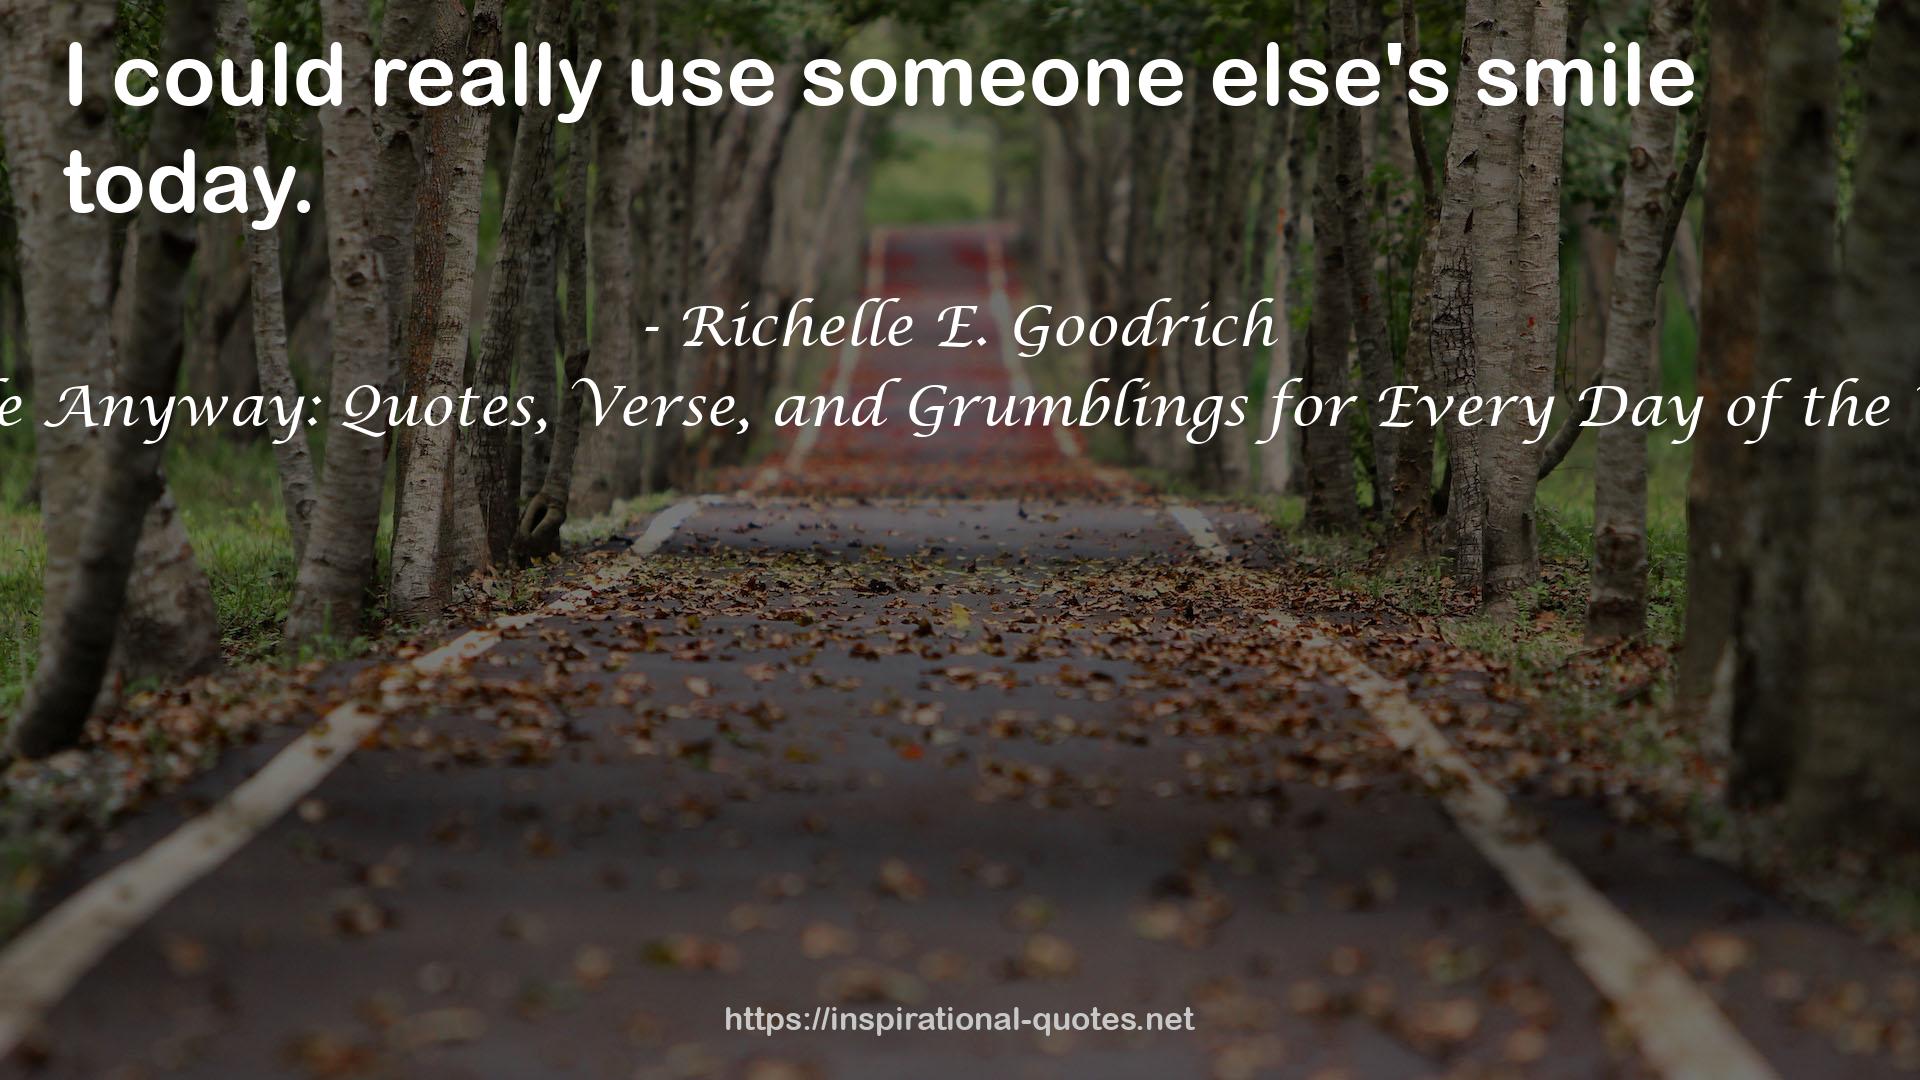 Smile Anyway: Quotes, Verse, and Grumblings for Every Day of the Year QUOTES